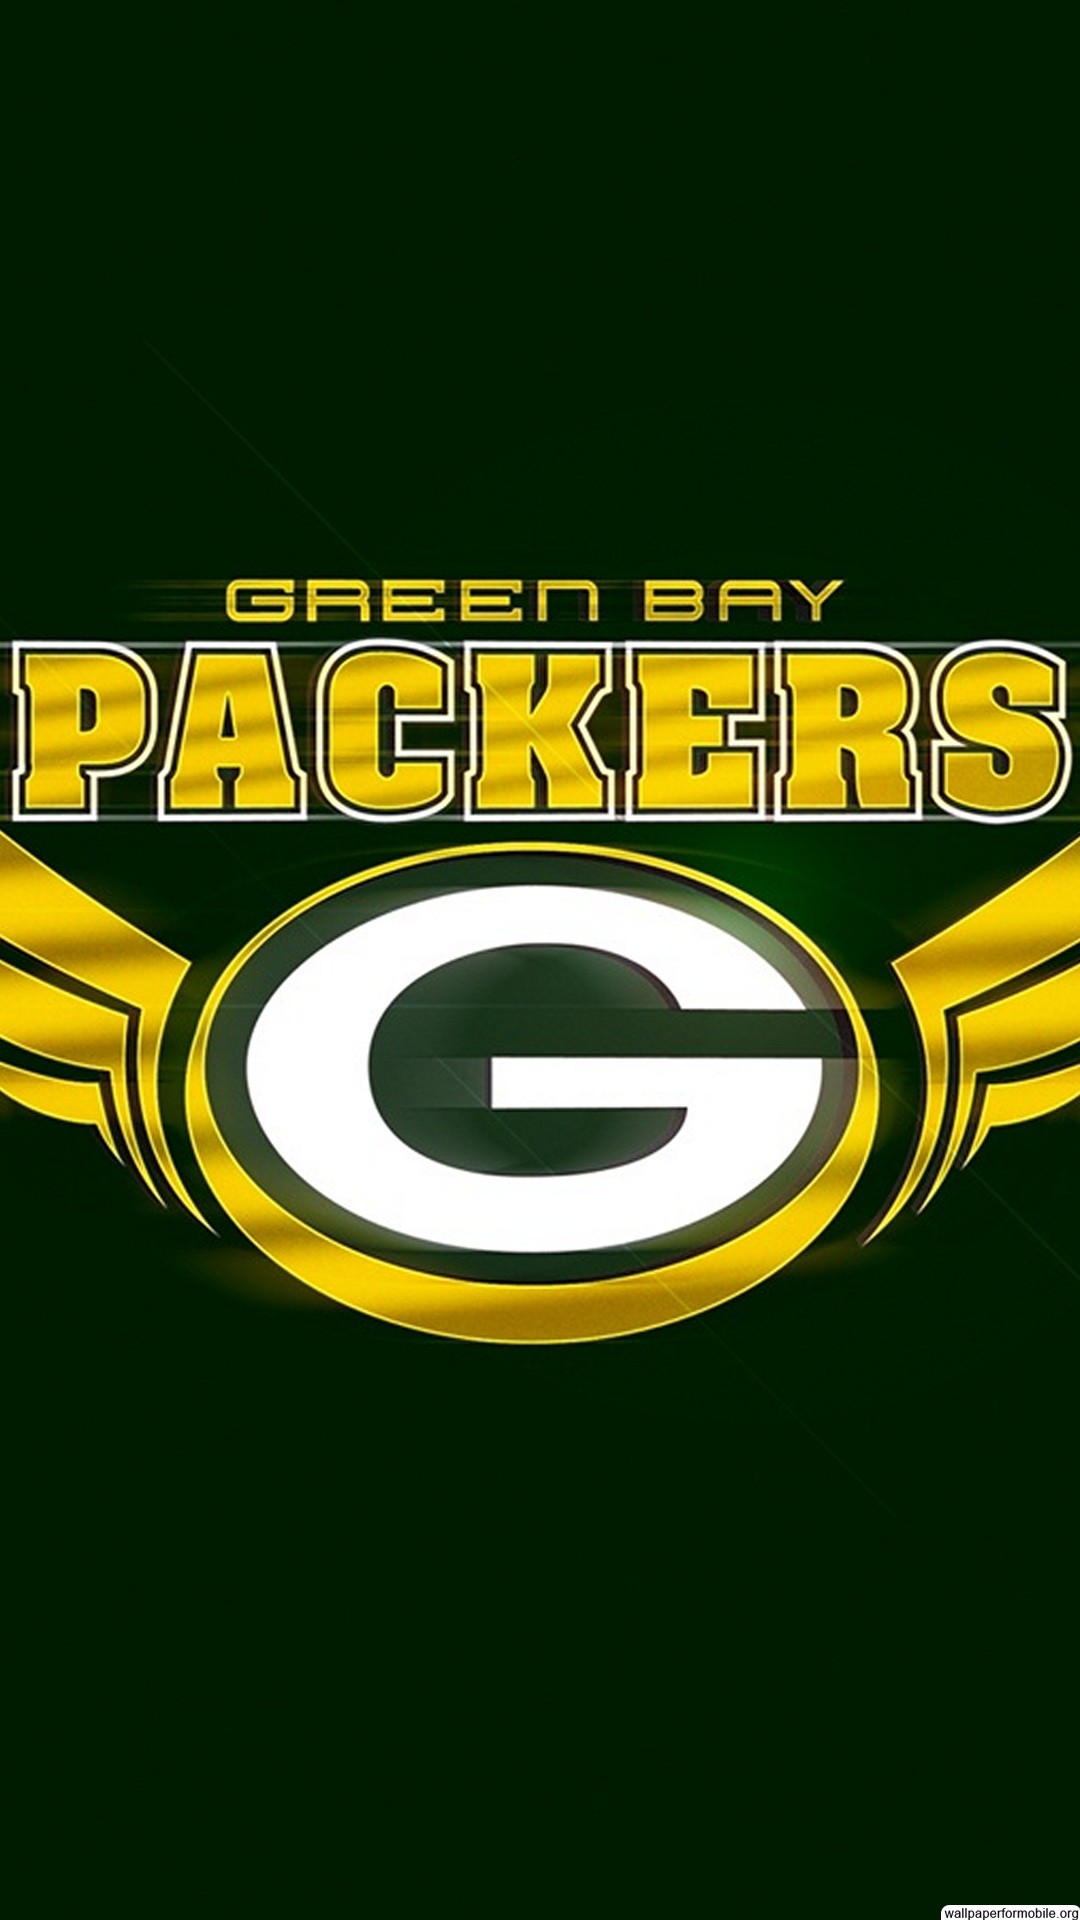 Green Bay Packers Wallpaper (65+ images)